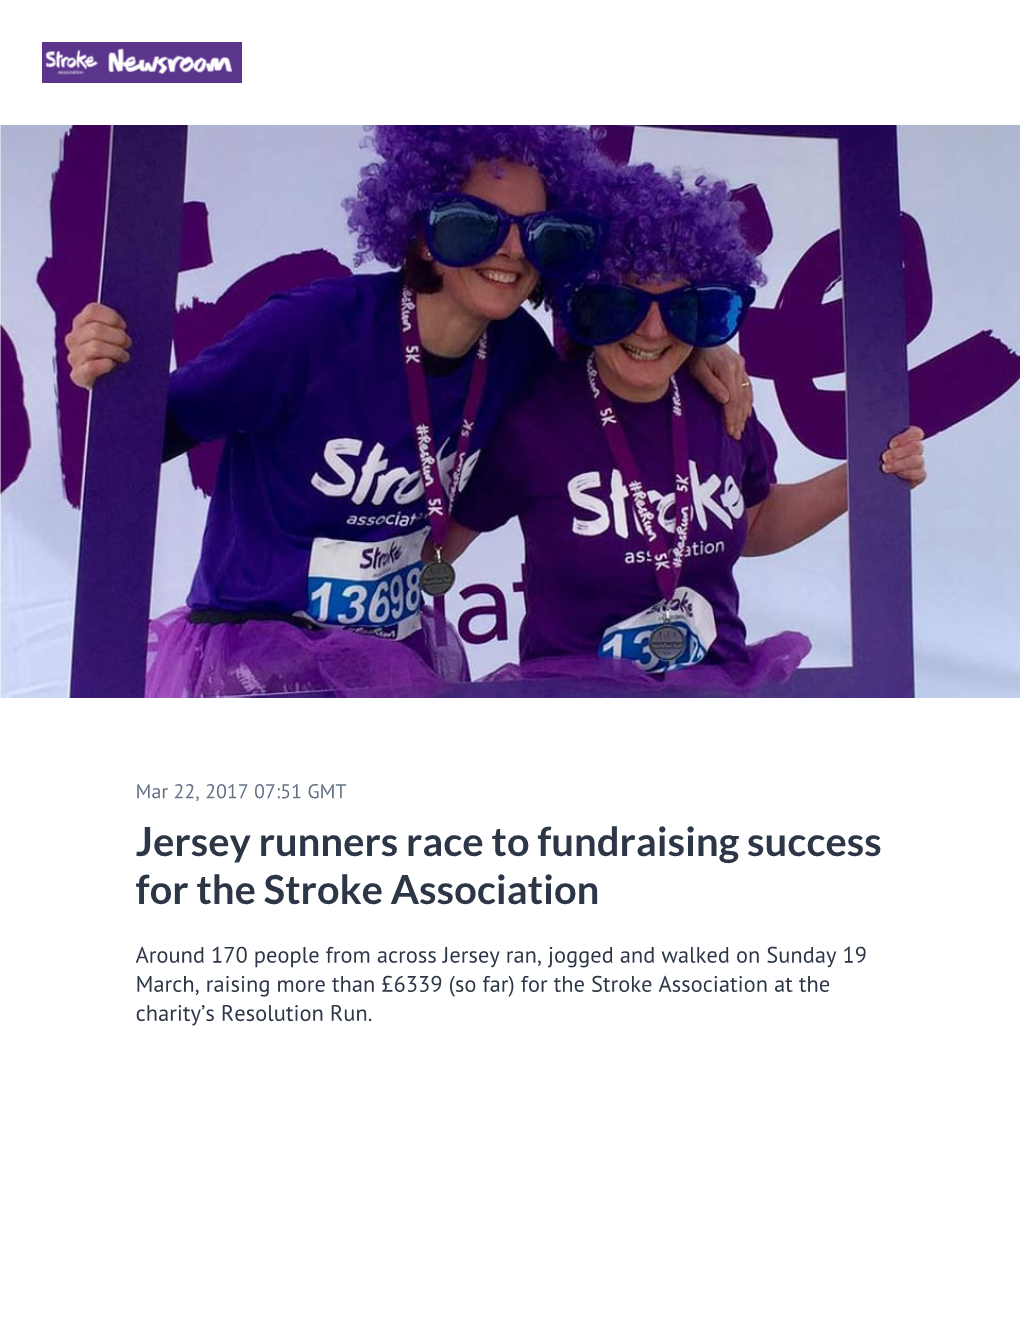 Jersey Runners Race to Fundraising Success for the Stroke Association